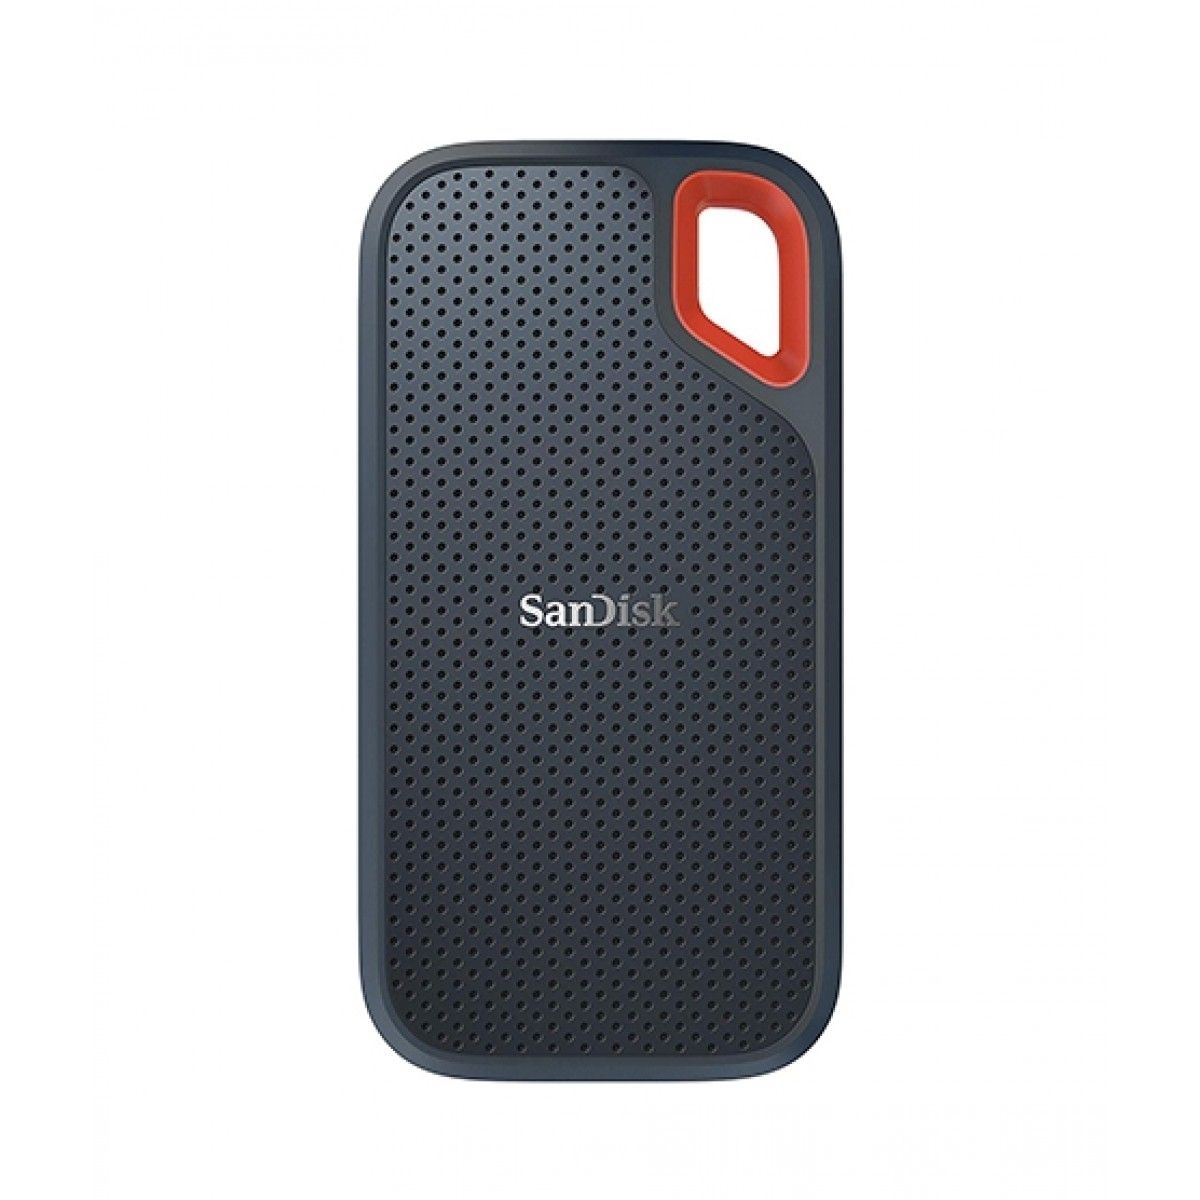 SanDisk Extreme 500GB Portable Solid State Drive